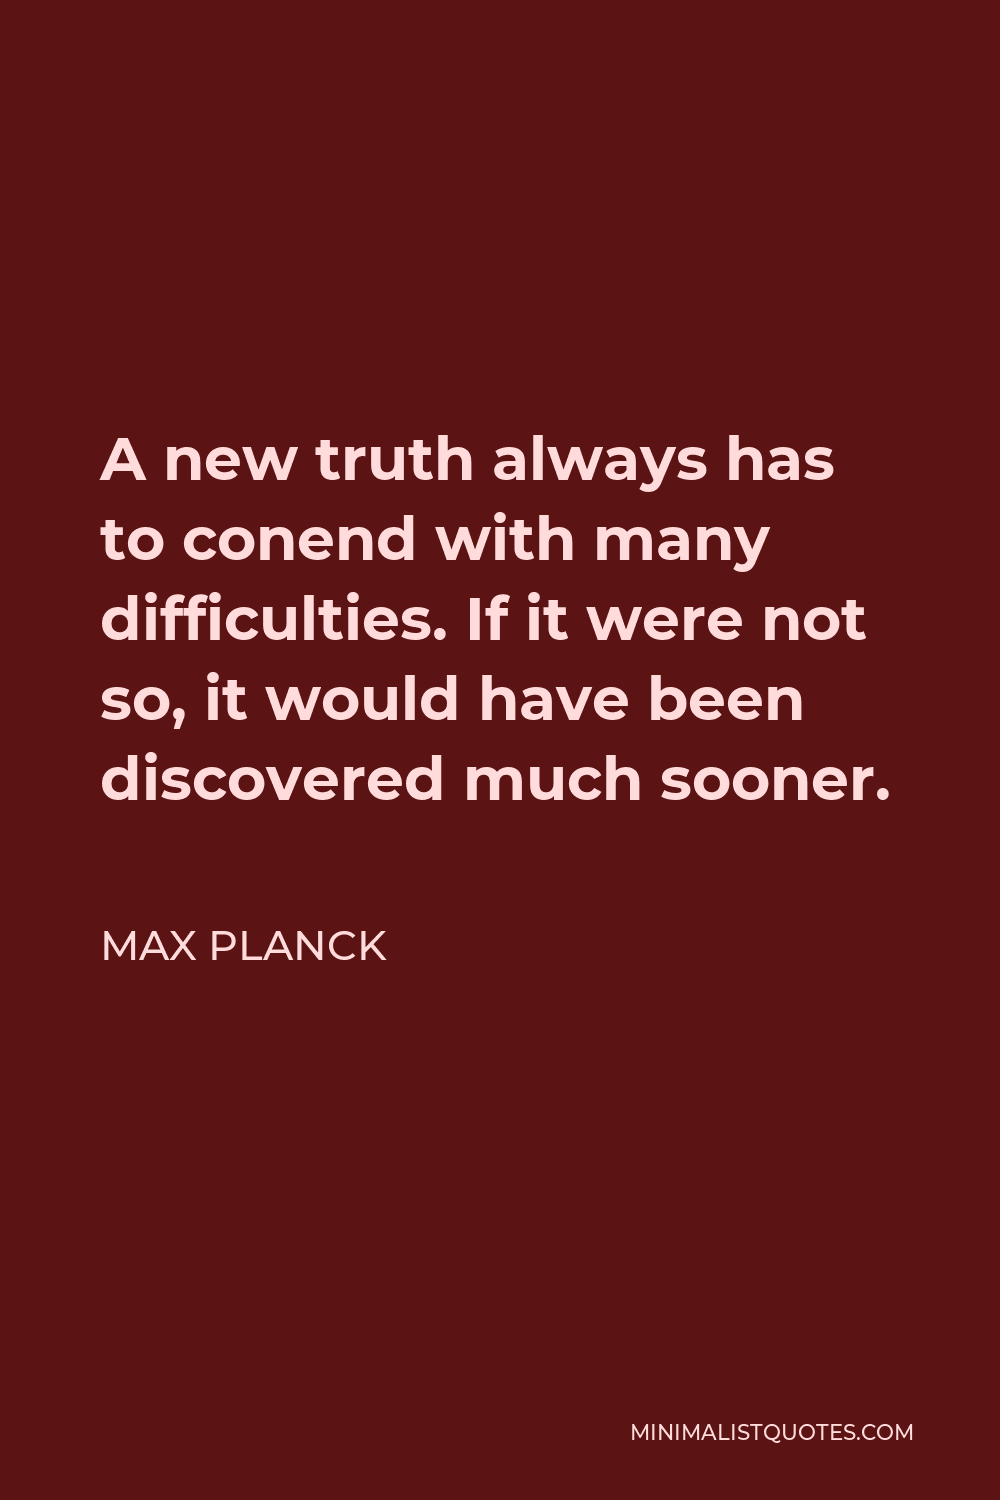 Max Planck Quote - A new truth always has to conend with many difficulties. If it were not so, it would have been discovered much sooner.